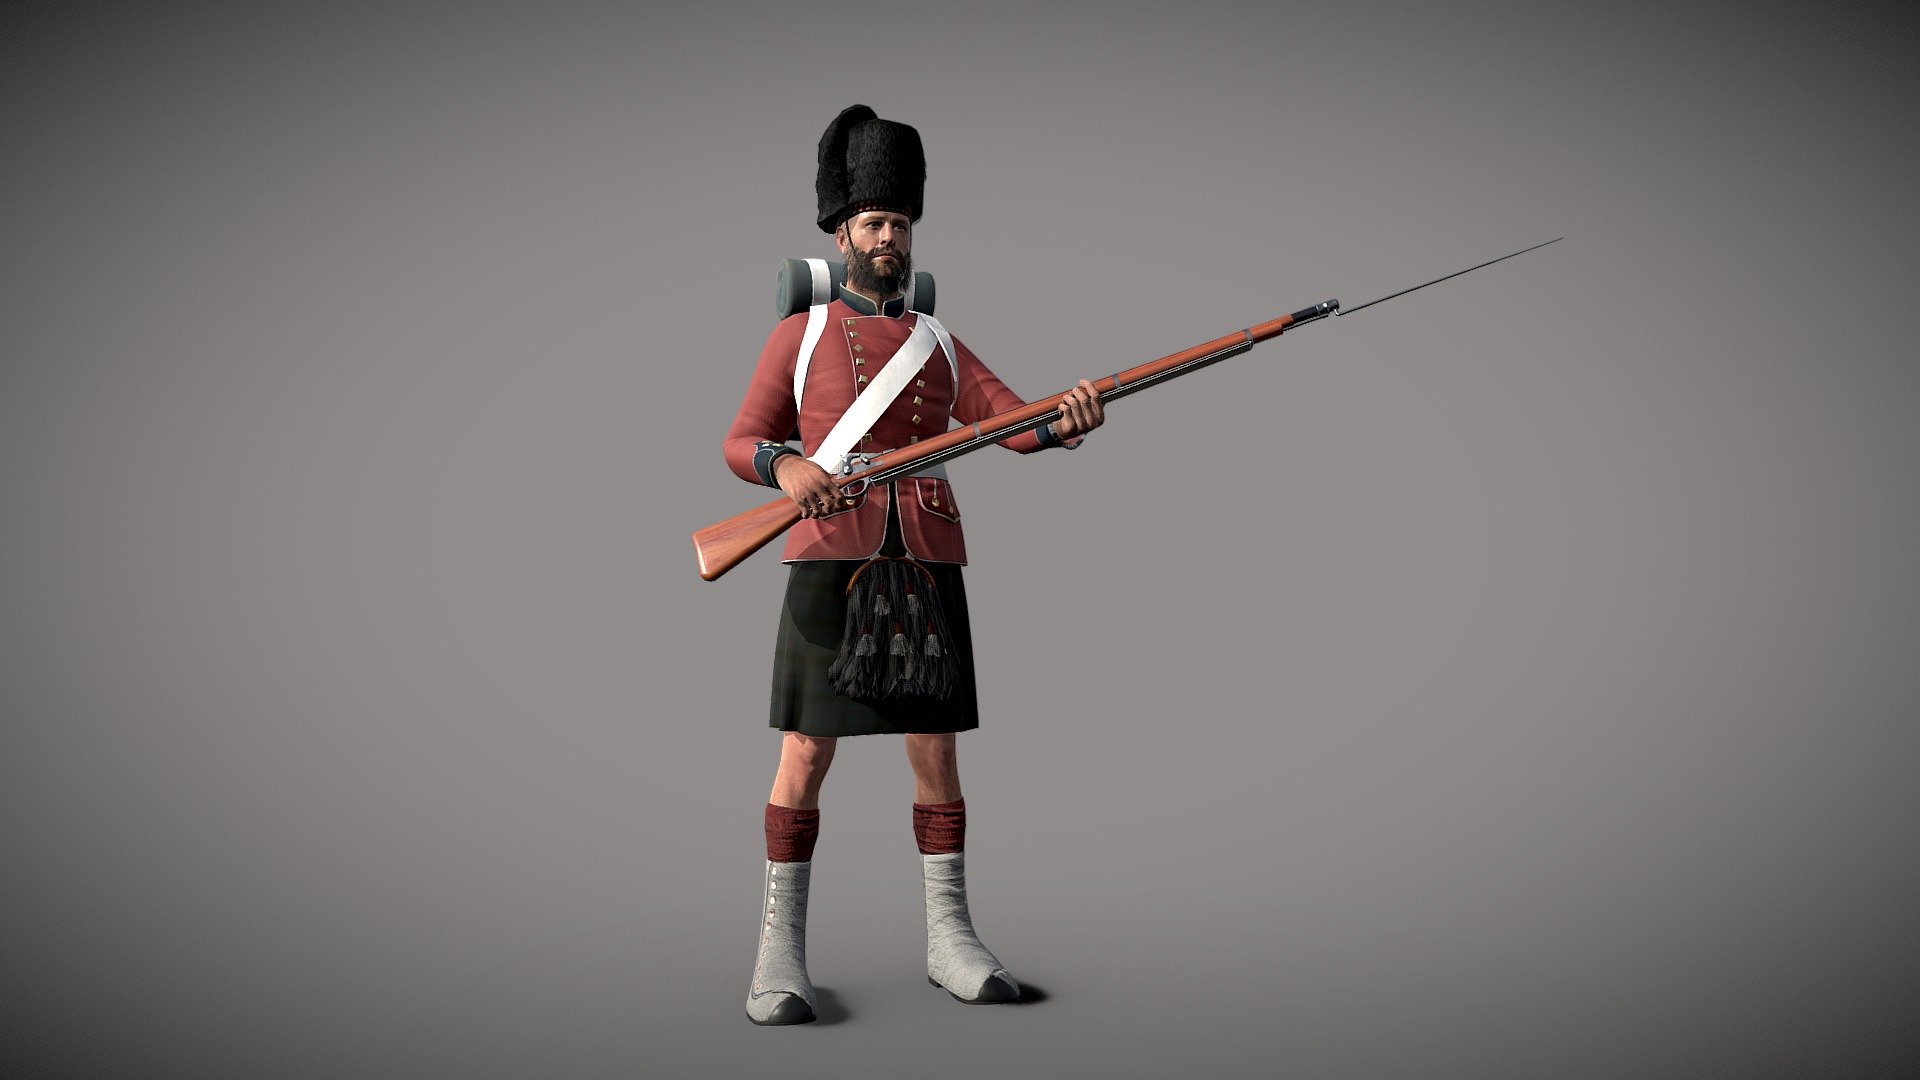 The 42nd (Royal Highland) Regiment of Foot also called the Black Guard, took part in the siege of the main Russian naval base in the Black Sea - Sevastopol. The siege lasted 349 days and was one of the most important battles of the Crimean War. This clash largely determined the outcome of the entire war 3d model